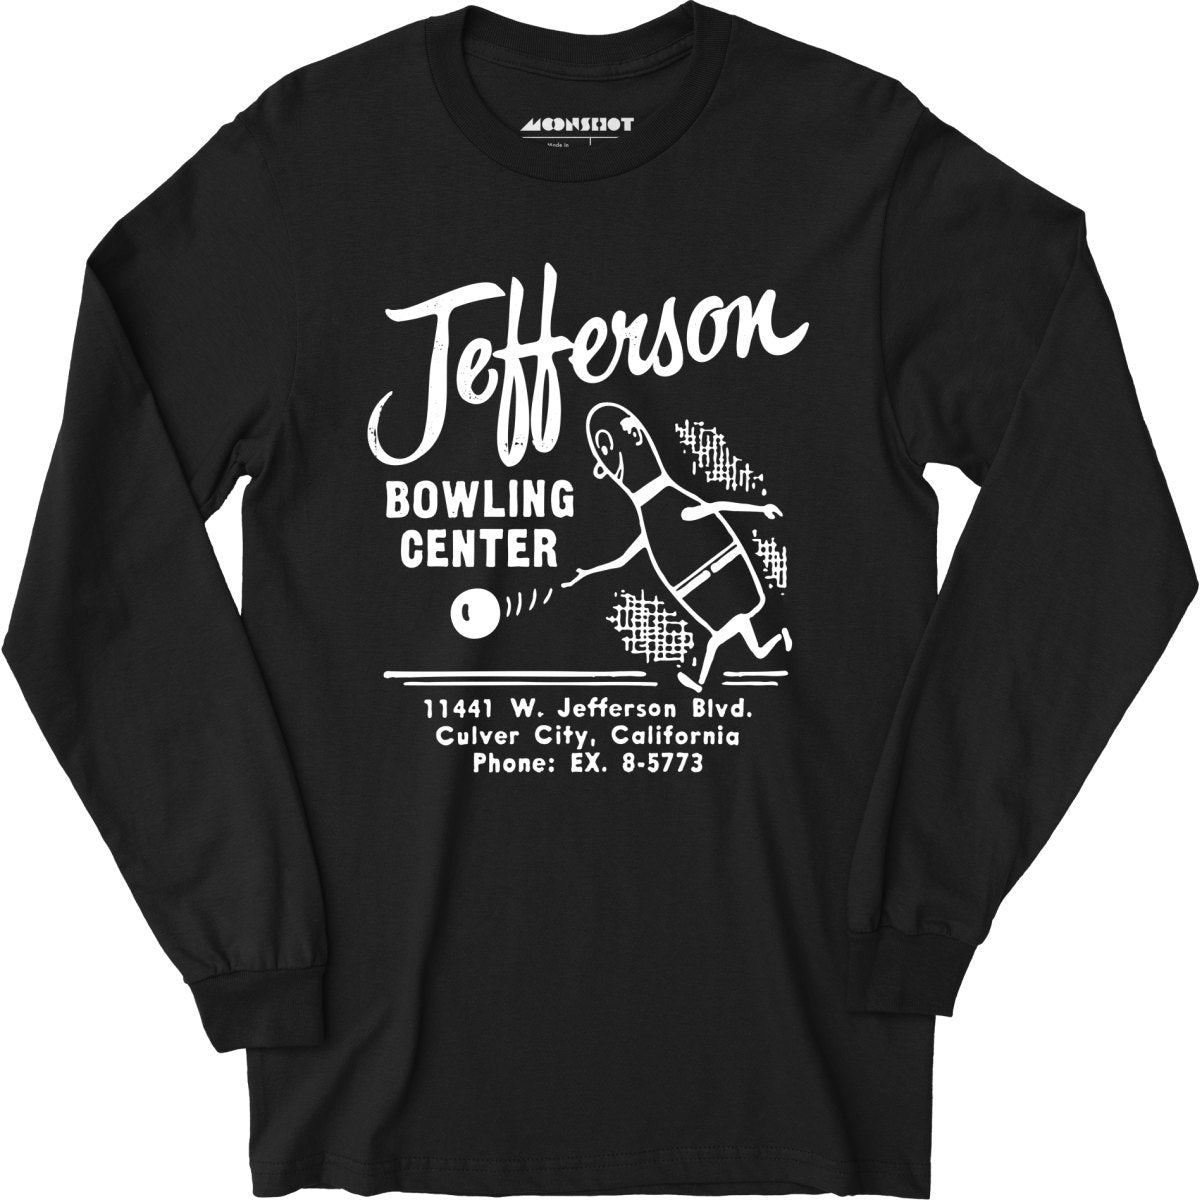 Jefferson Bowling Center - Culver City, CA - Vintage Bowling Alley - Long Sleeve T-Shirt